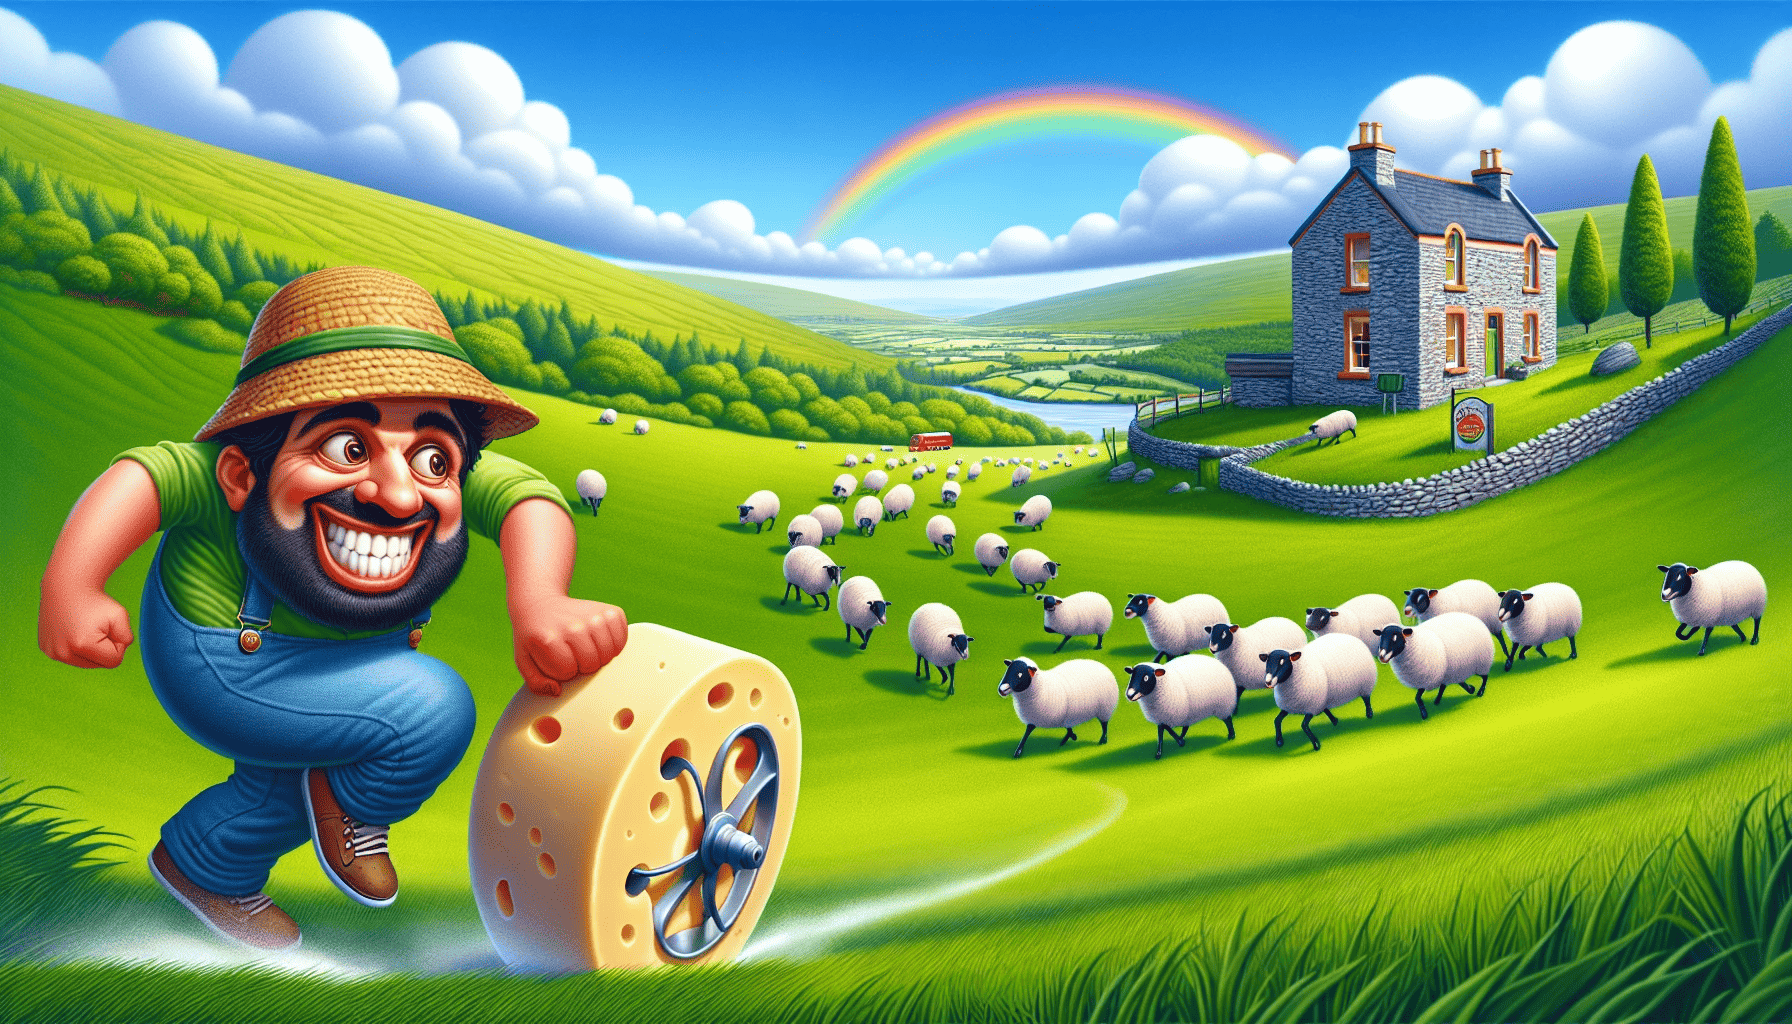 A picturesque Irish countryside with a humorous twist